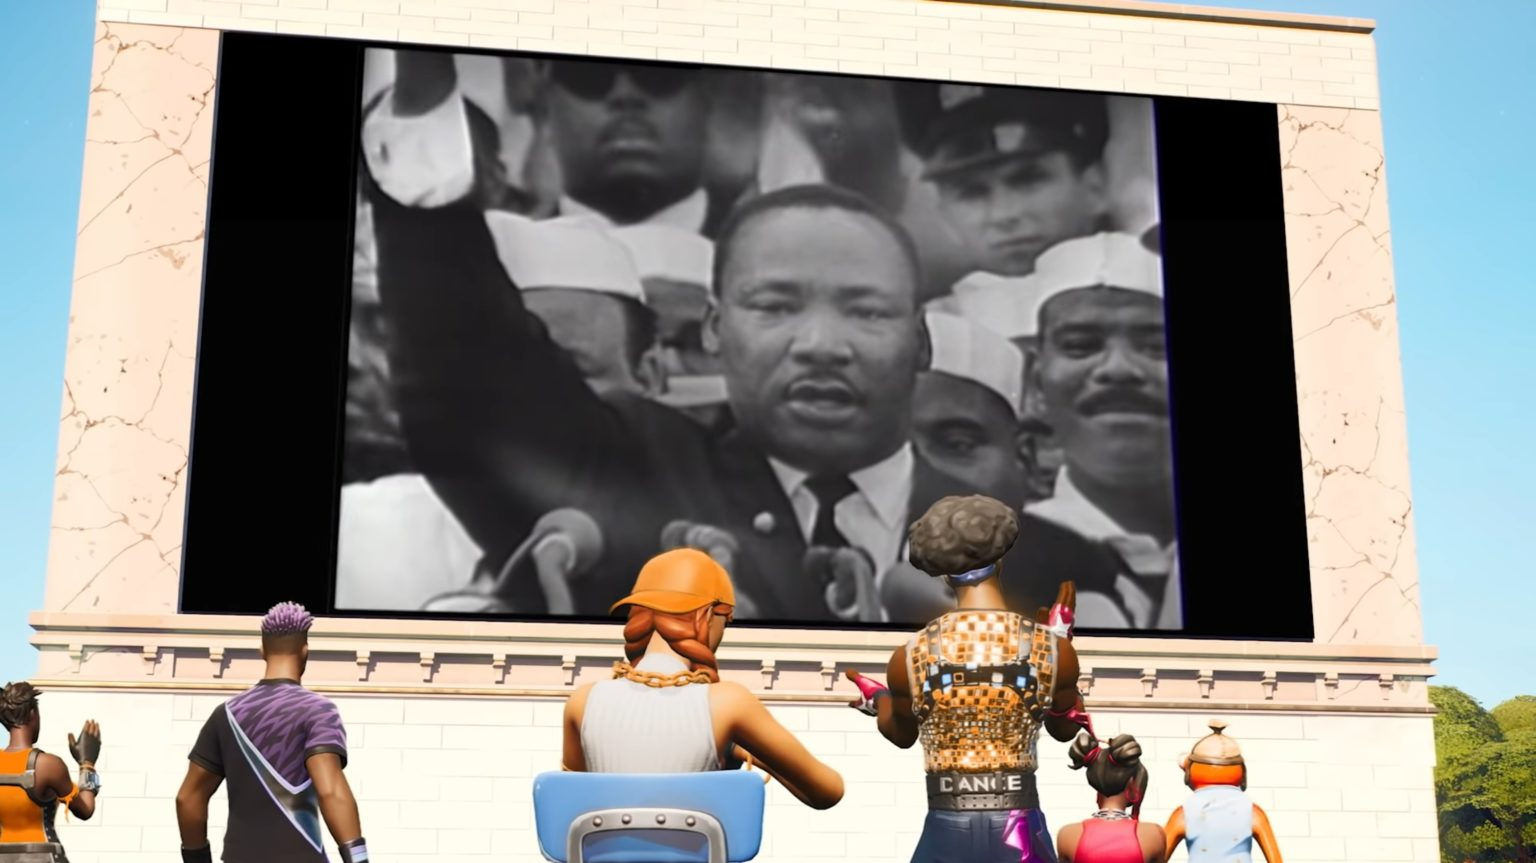 Fortnite and Time March Through Time Metaverse project with Dr. Martin Luther King Jr.